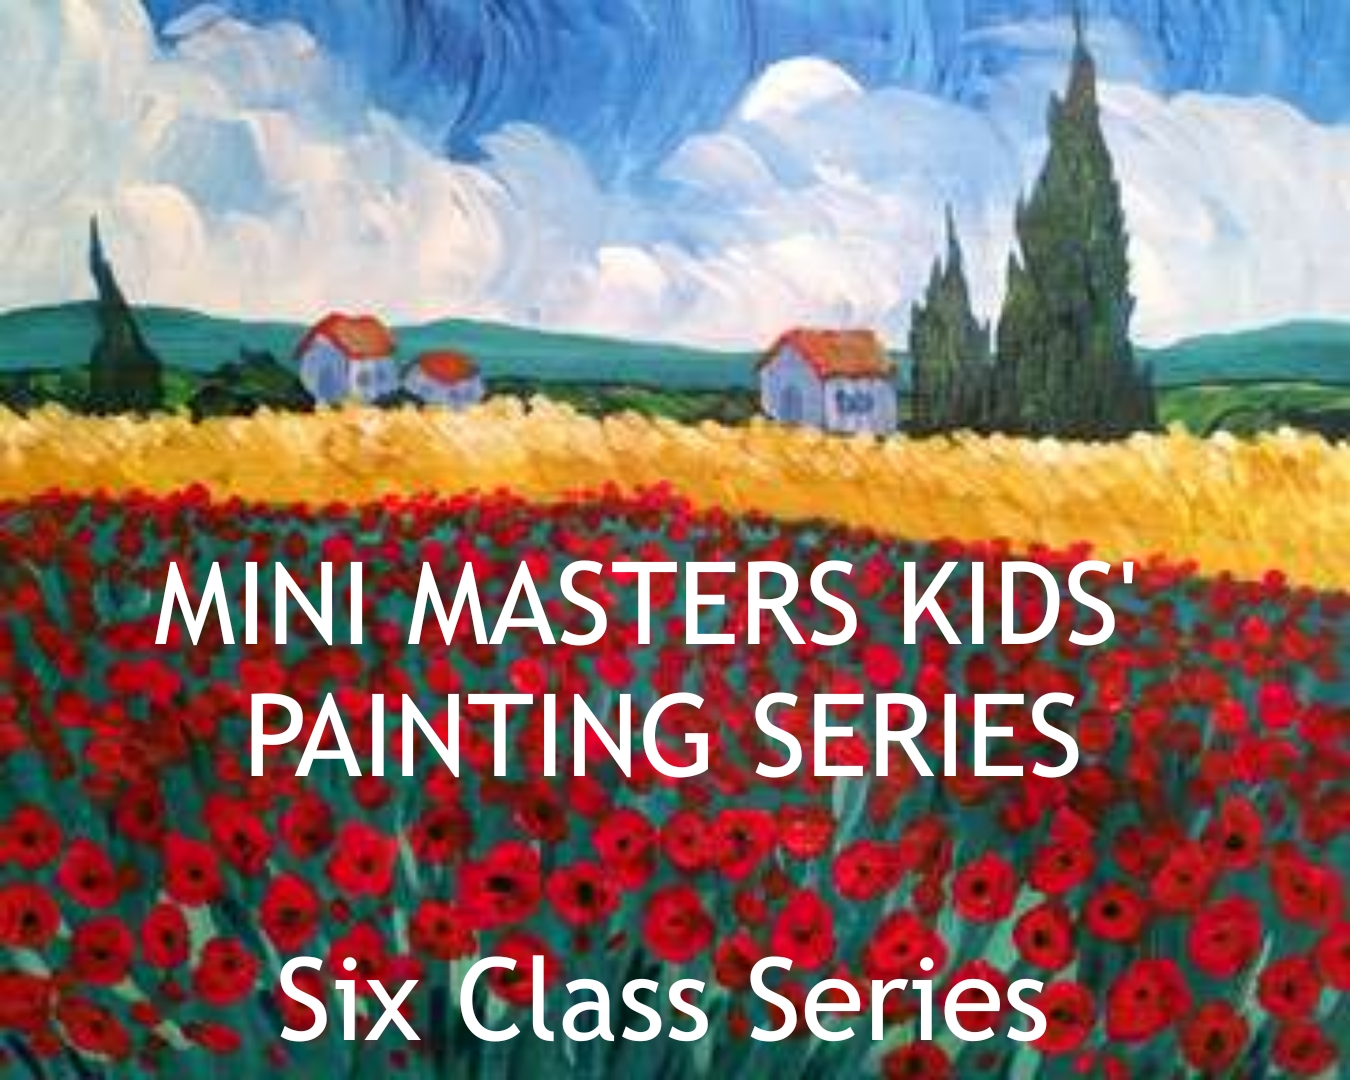 SIGN UP HERE FOR THE KIDS' MINI MASTERS' PAINTING SERIES!